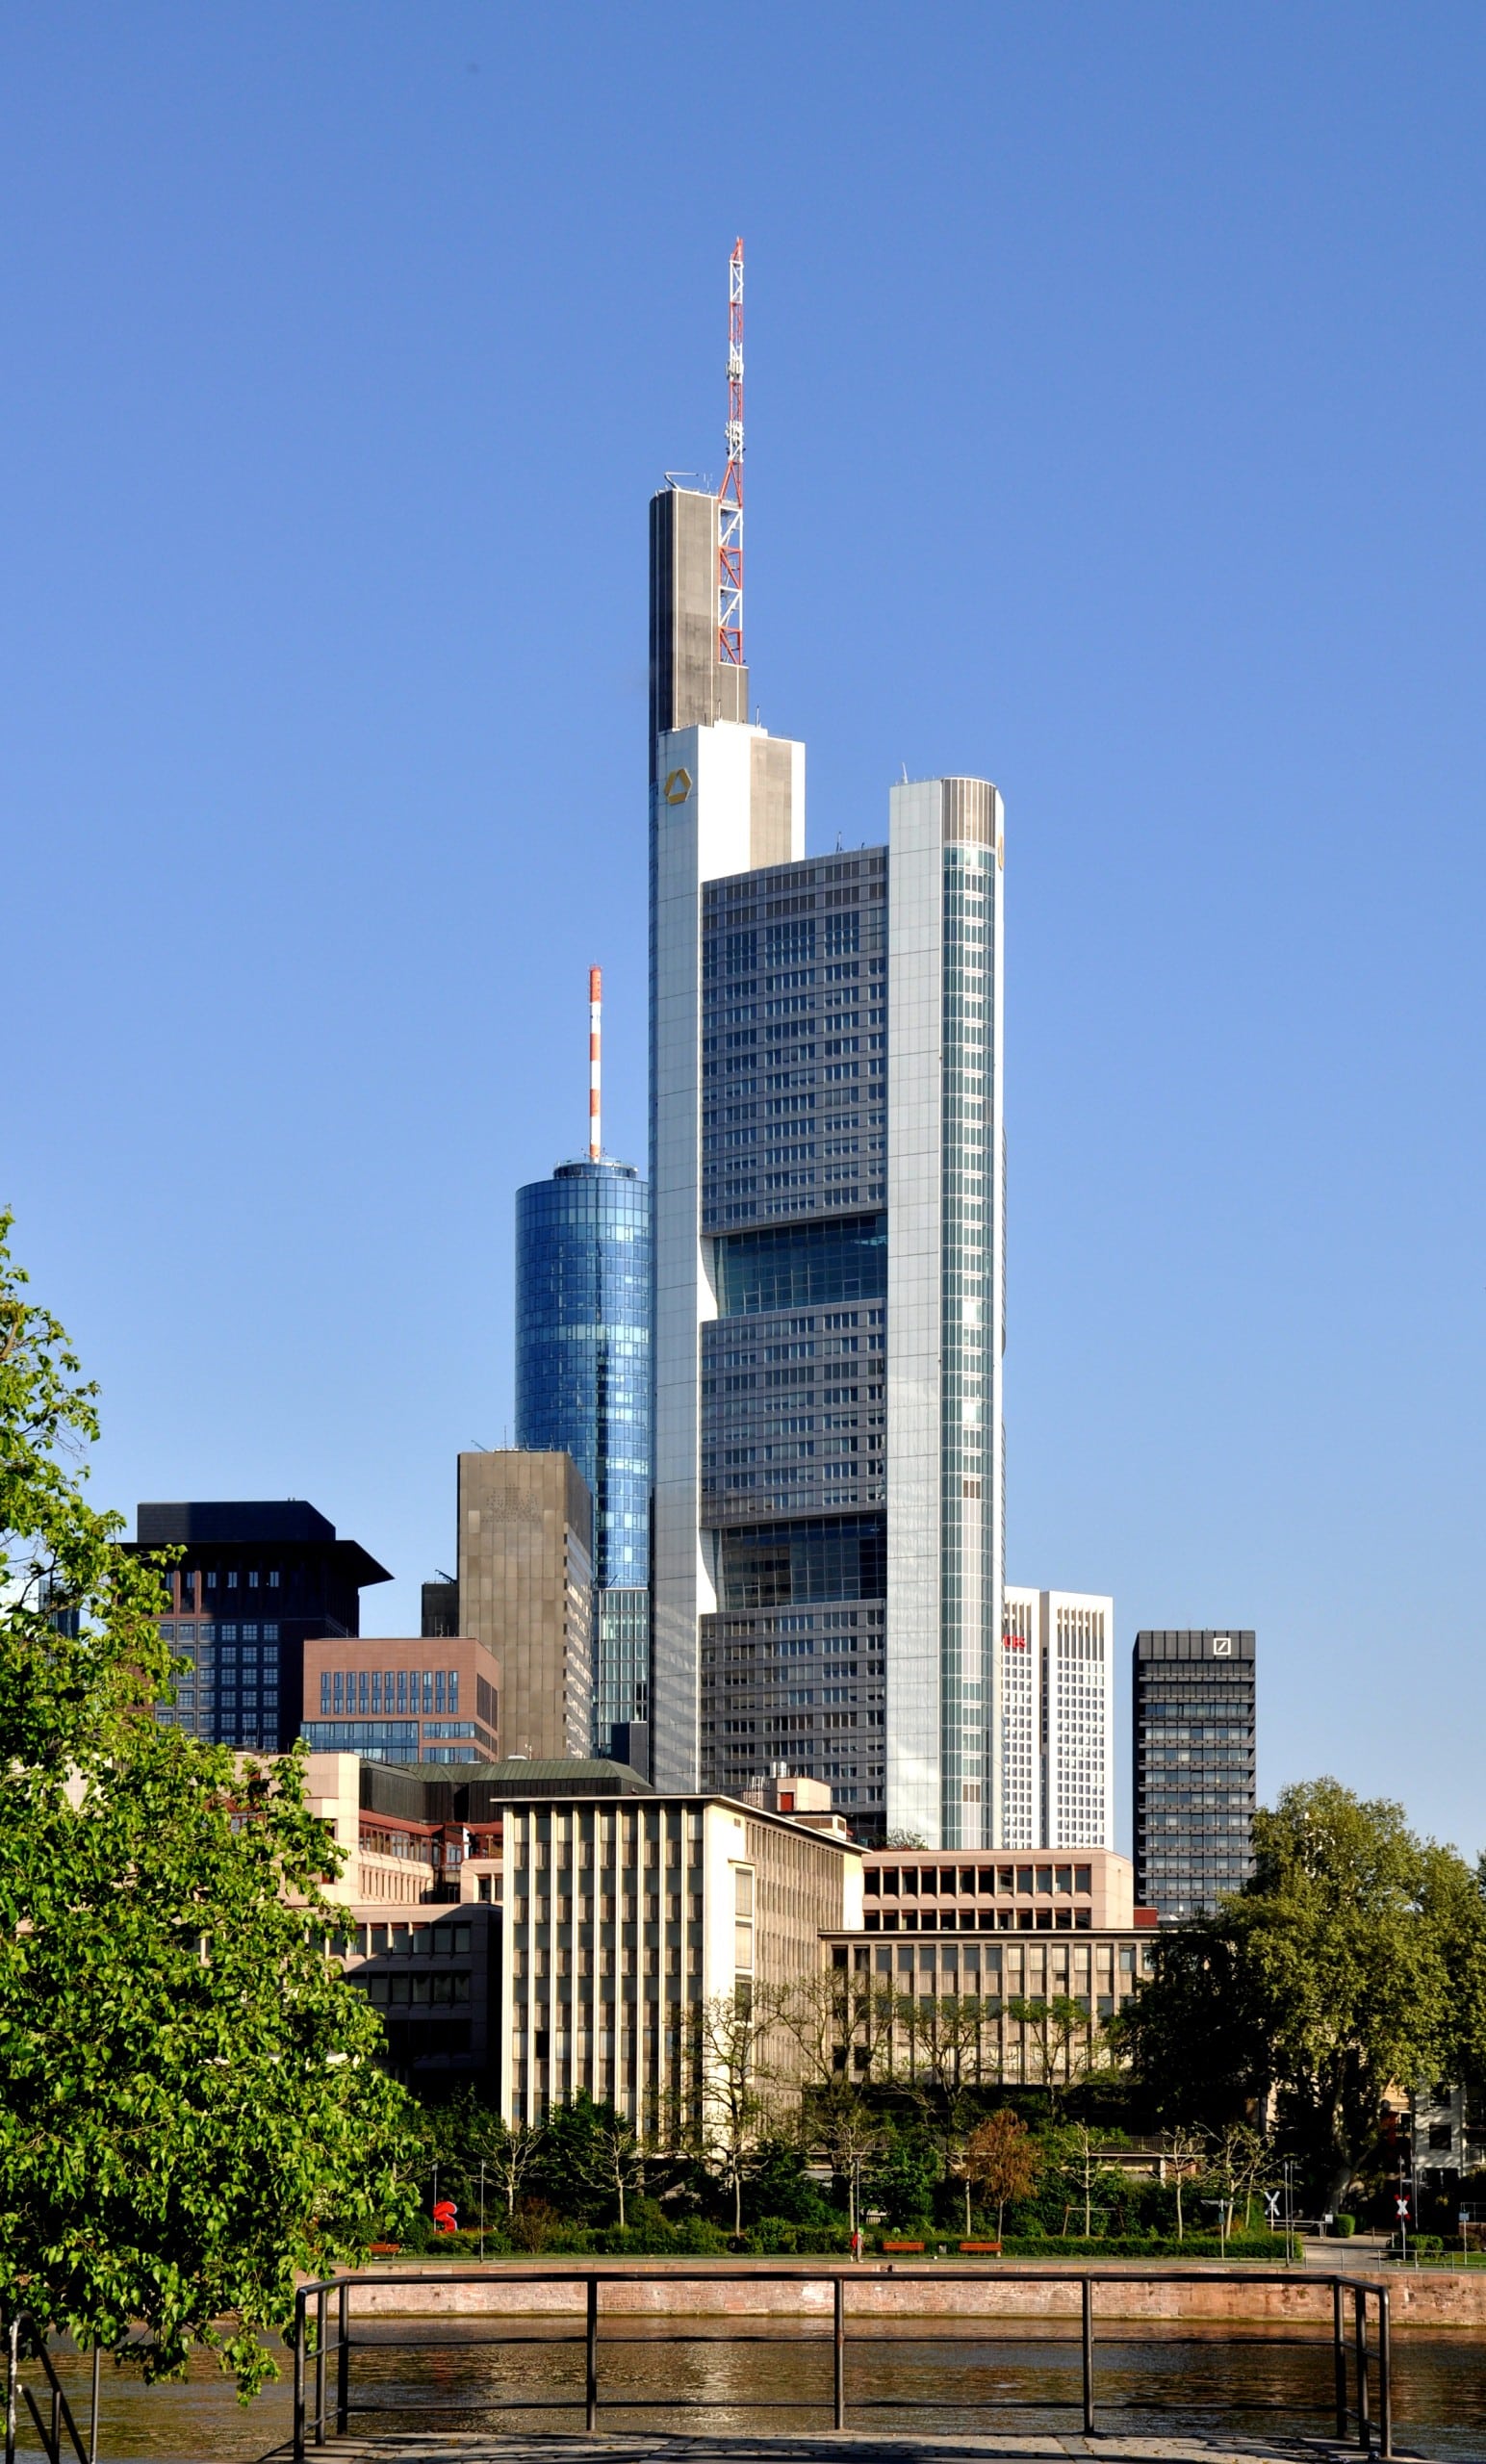 Der Commerzbank Tower in Frankfurt, Foto: Andreas Praefcke, CC BY 3.0 , via Wikimedia Commons